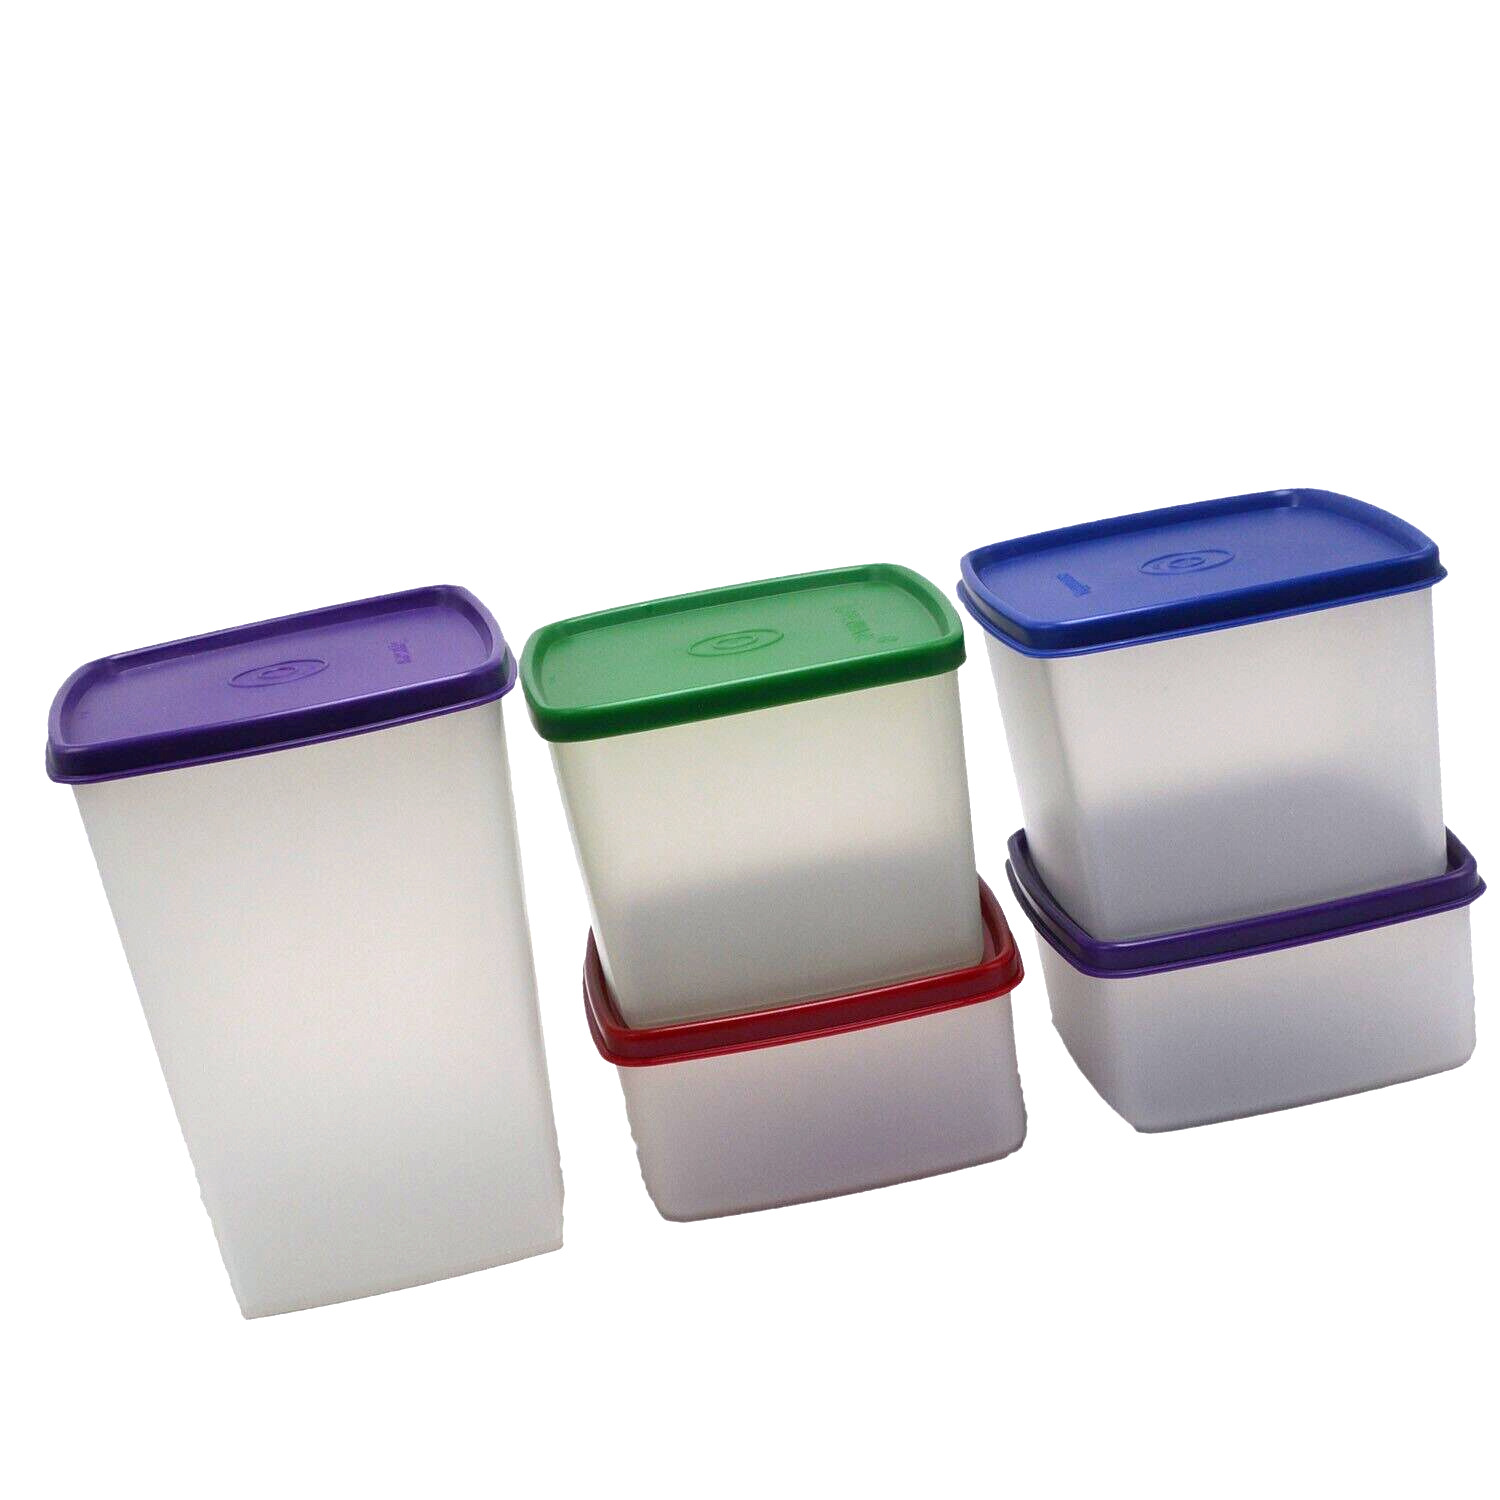 Tupperware Vintage Square Round Containers with Jewel Tone Lids Set of 5 NOS